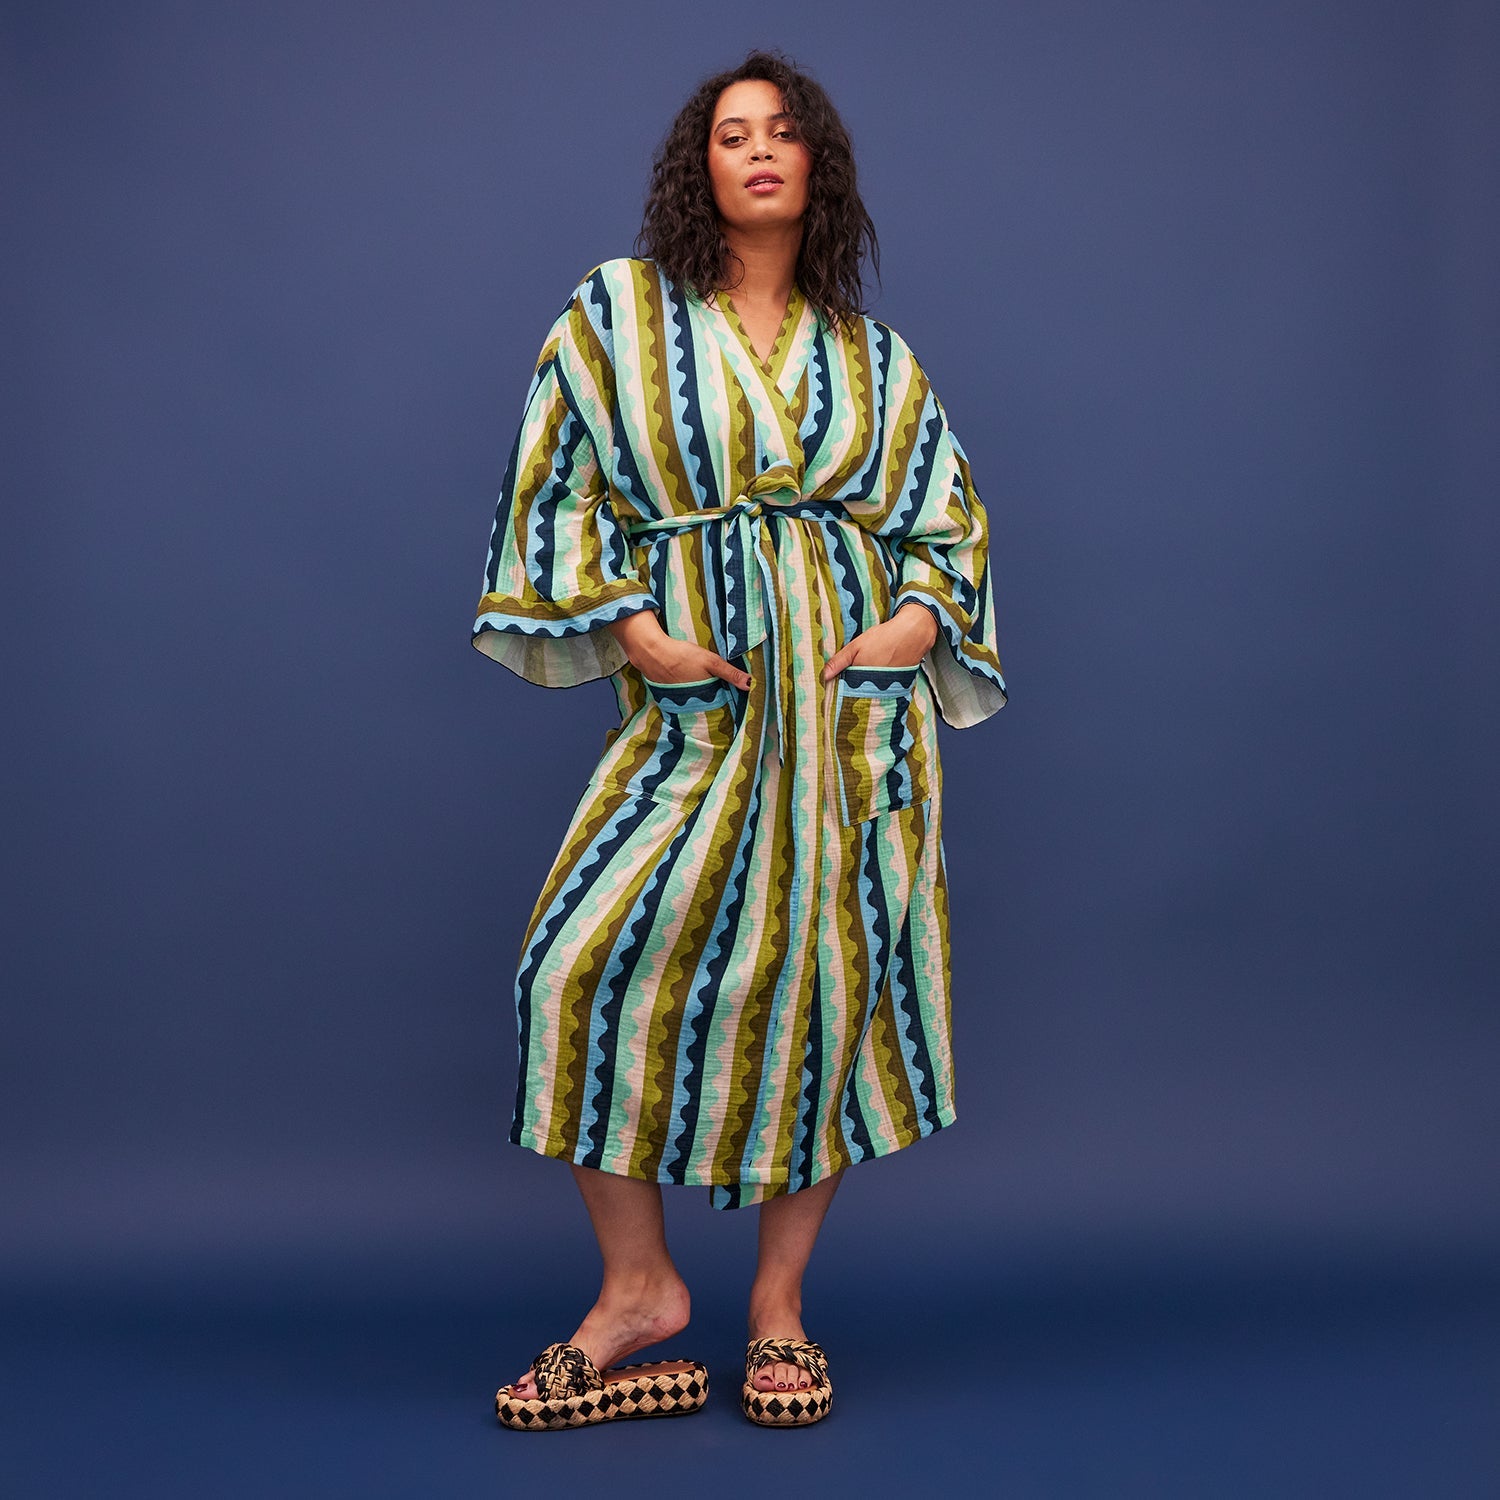 Sage and Clare - Bungee Cotton Bath Robe